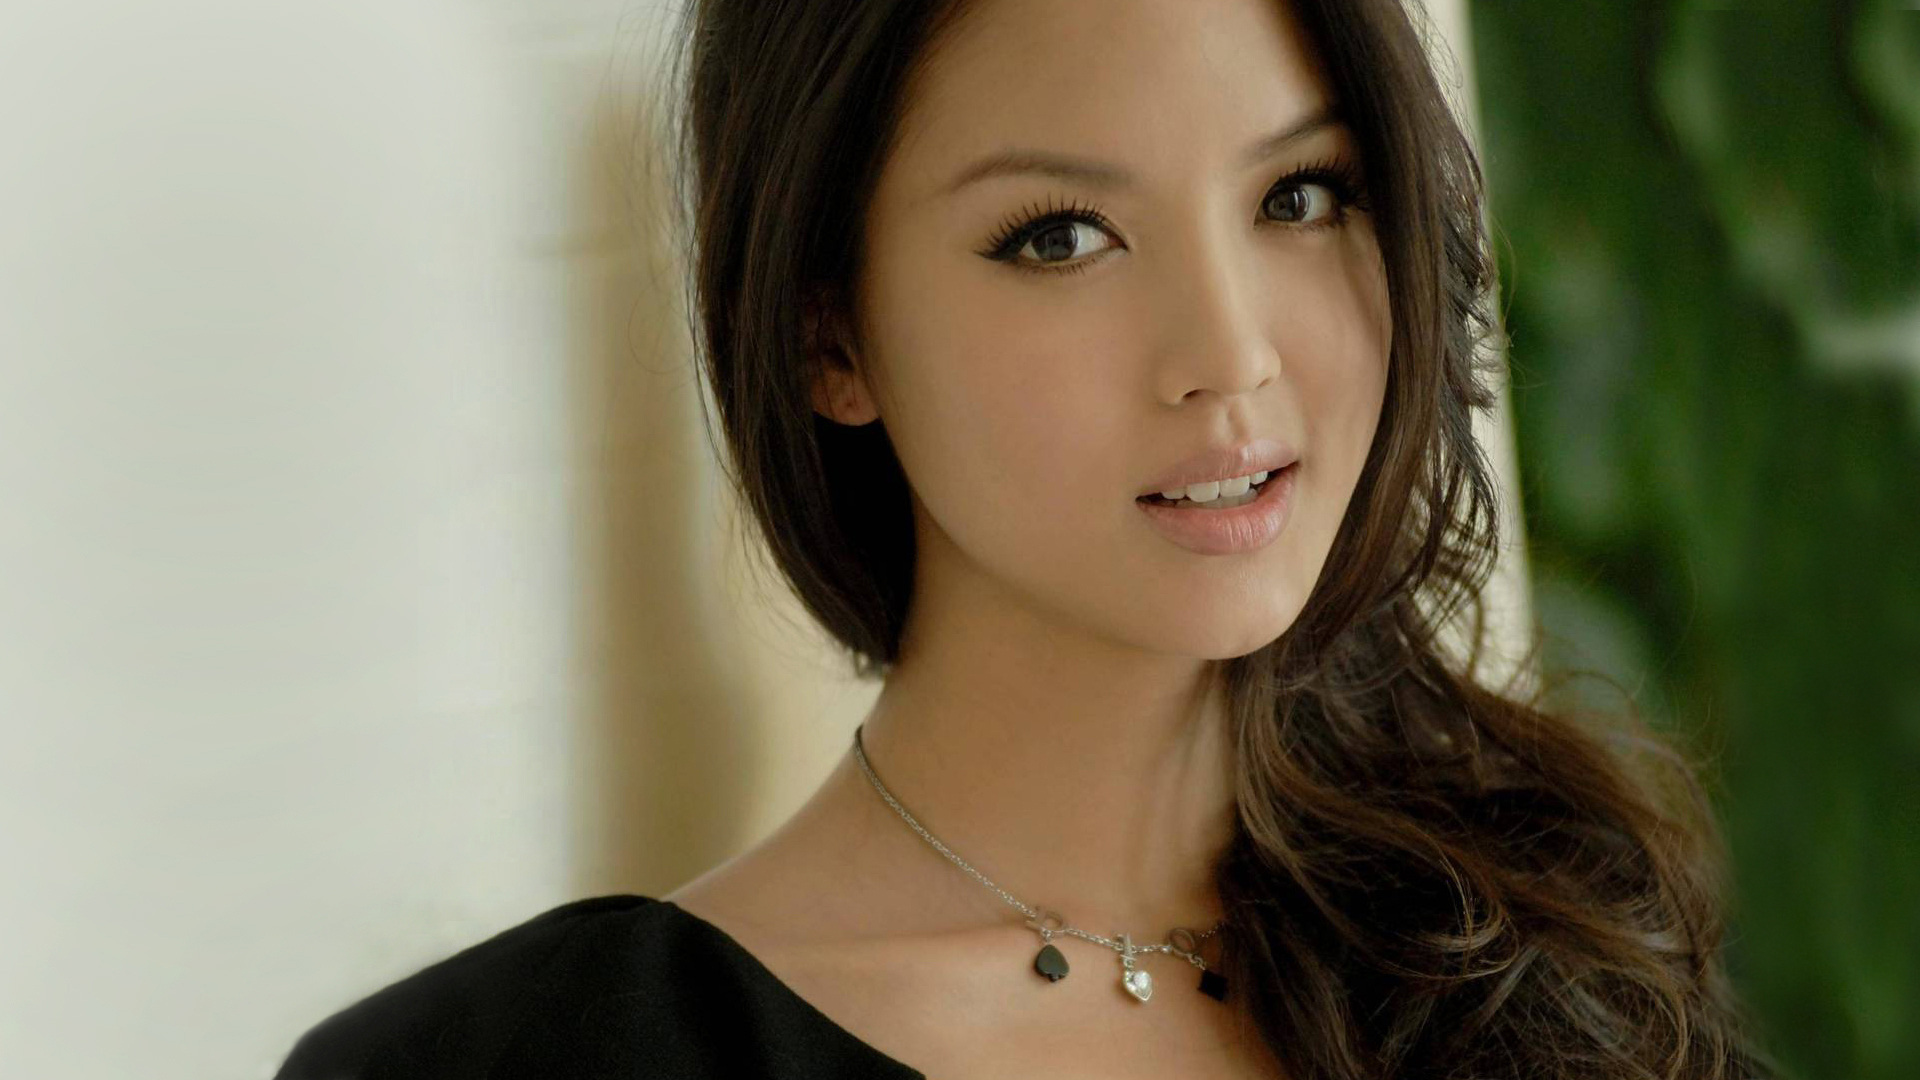 Zhang Zilin Wallpapers Images Photos Pictures Backgrounds